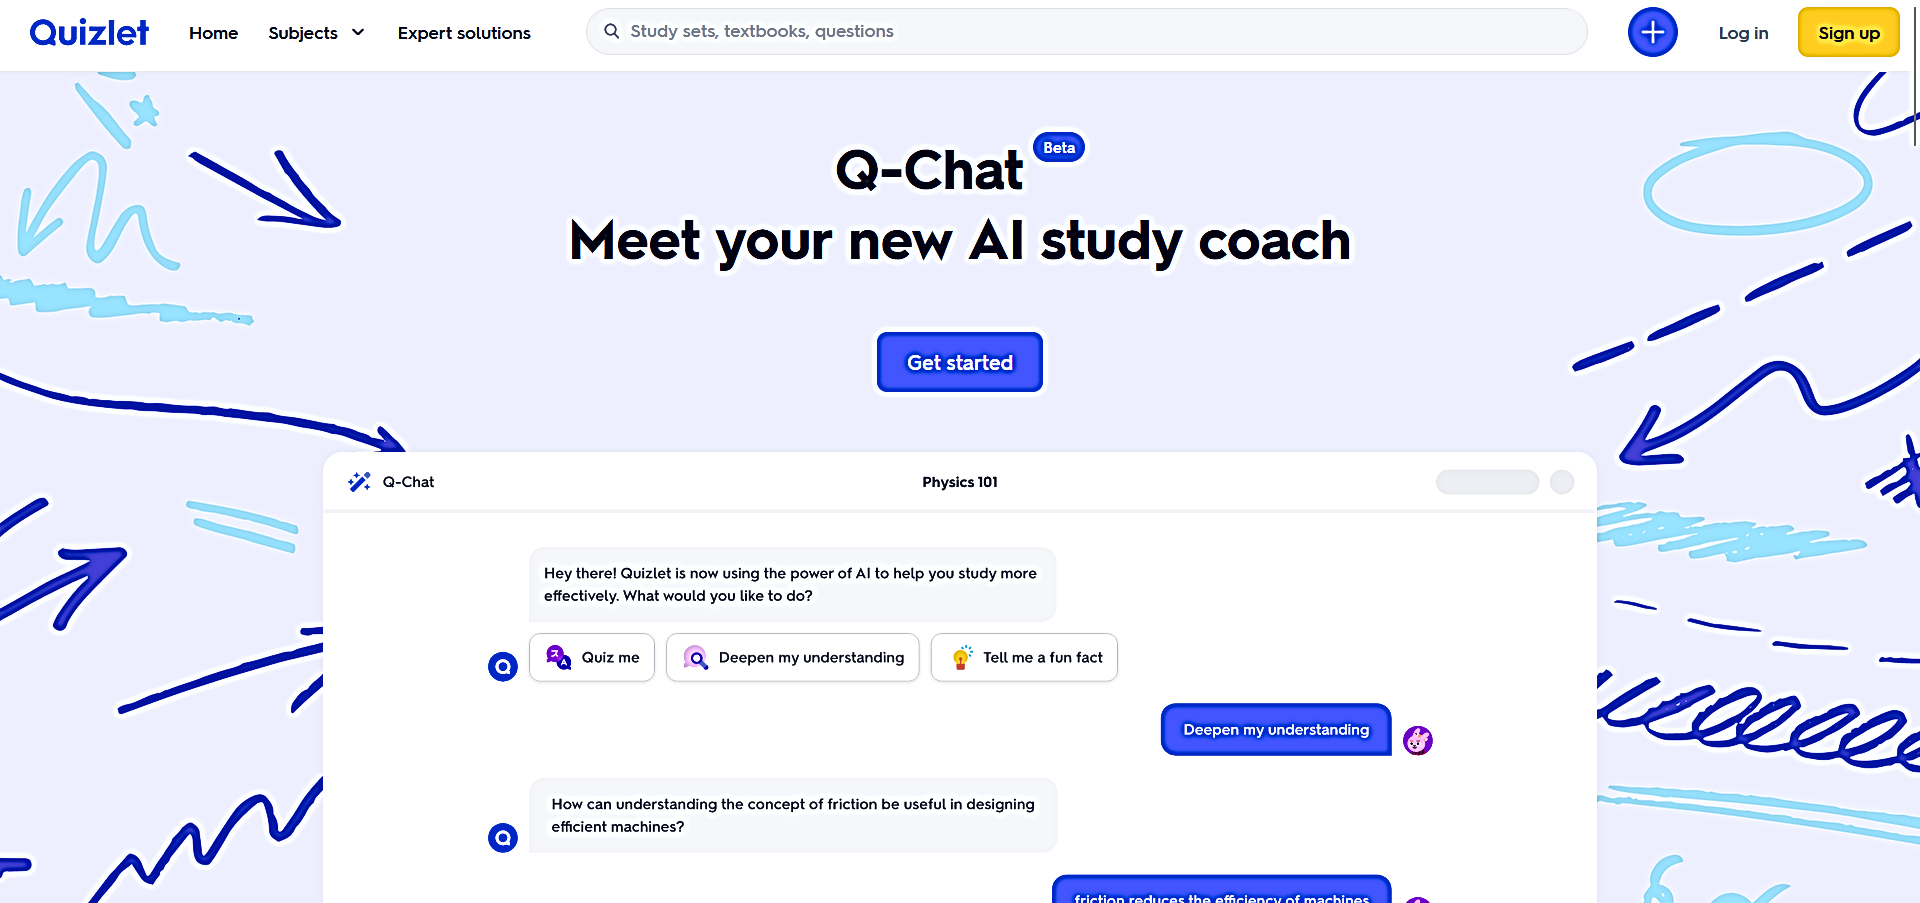 Q-Chat featured